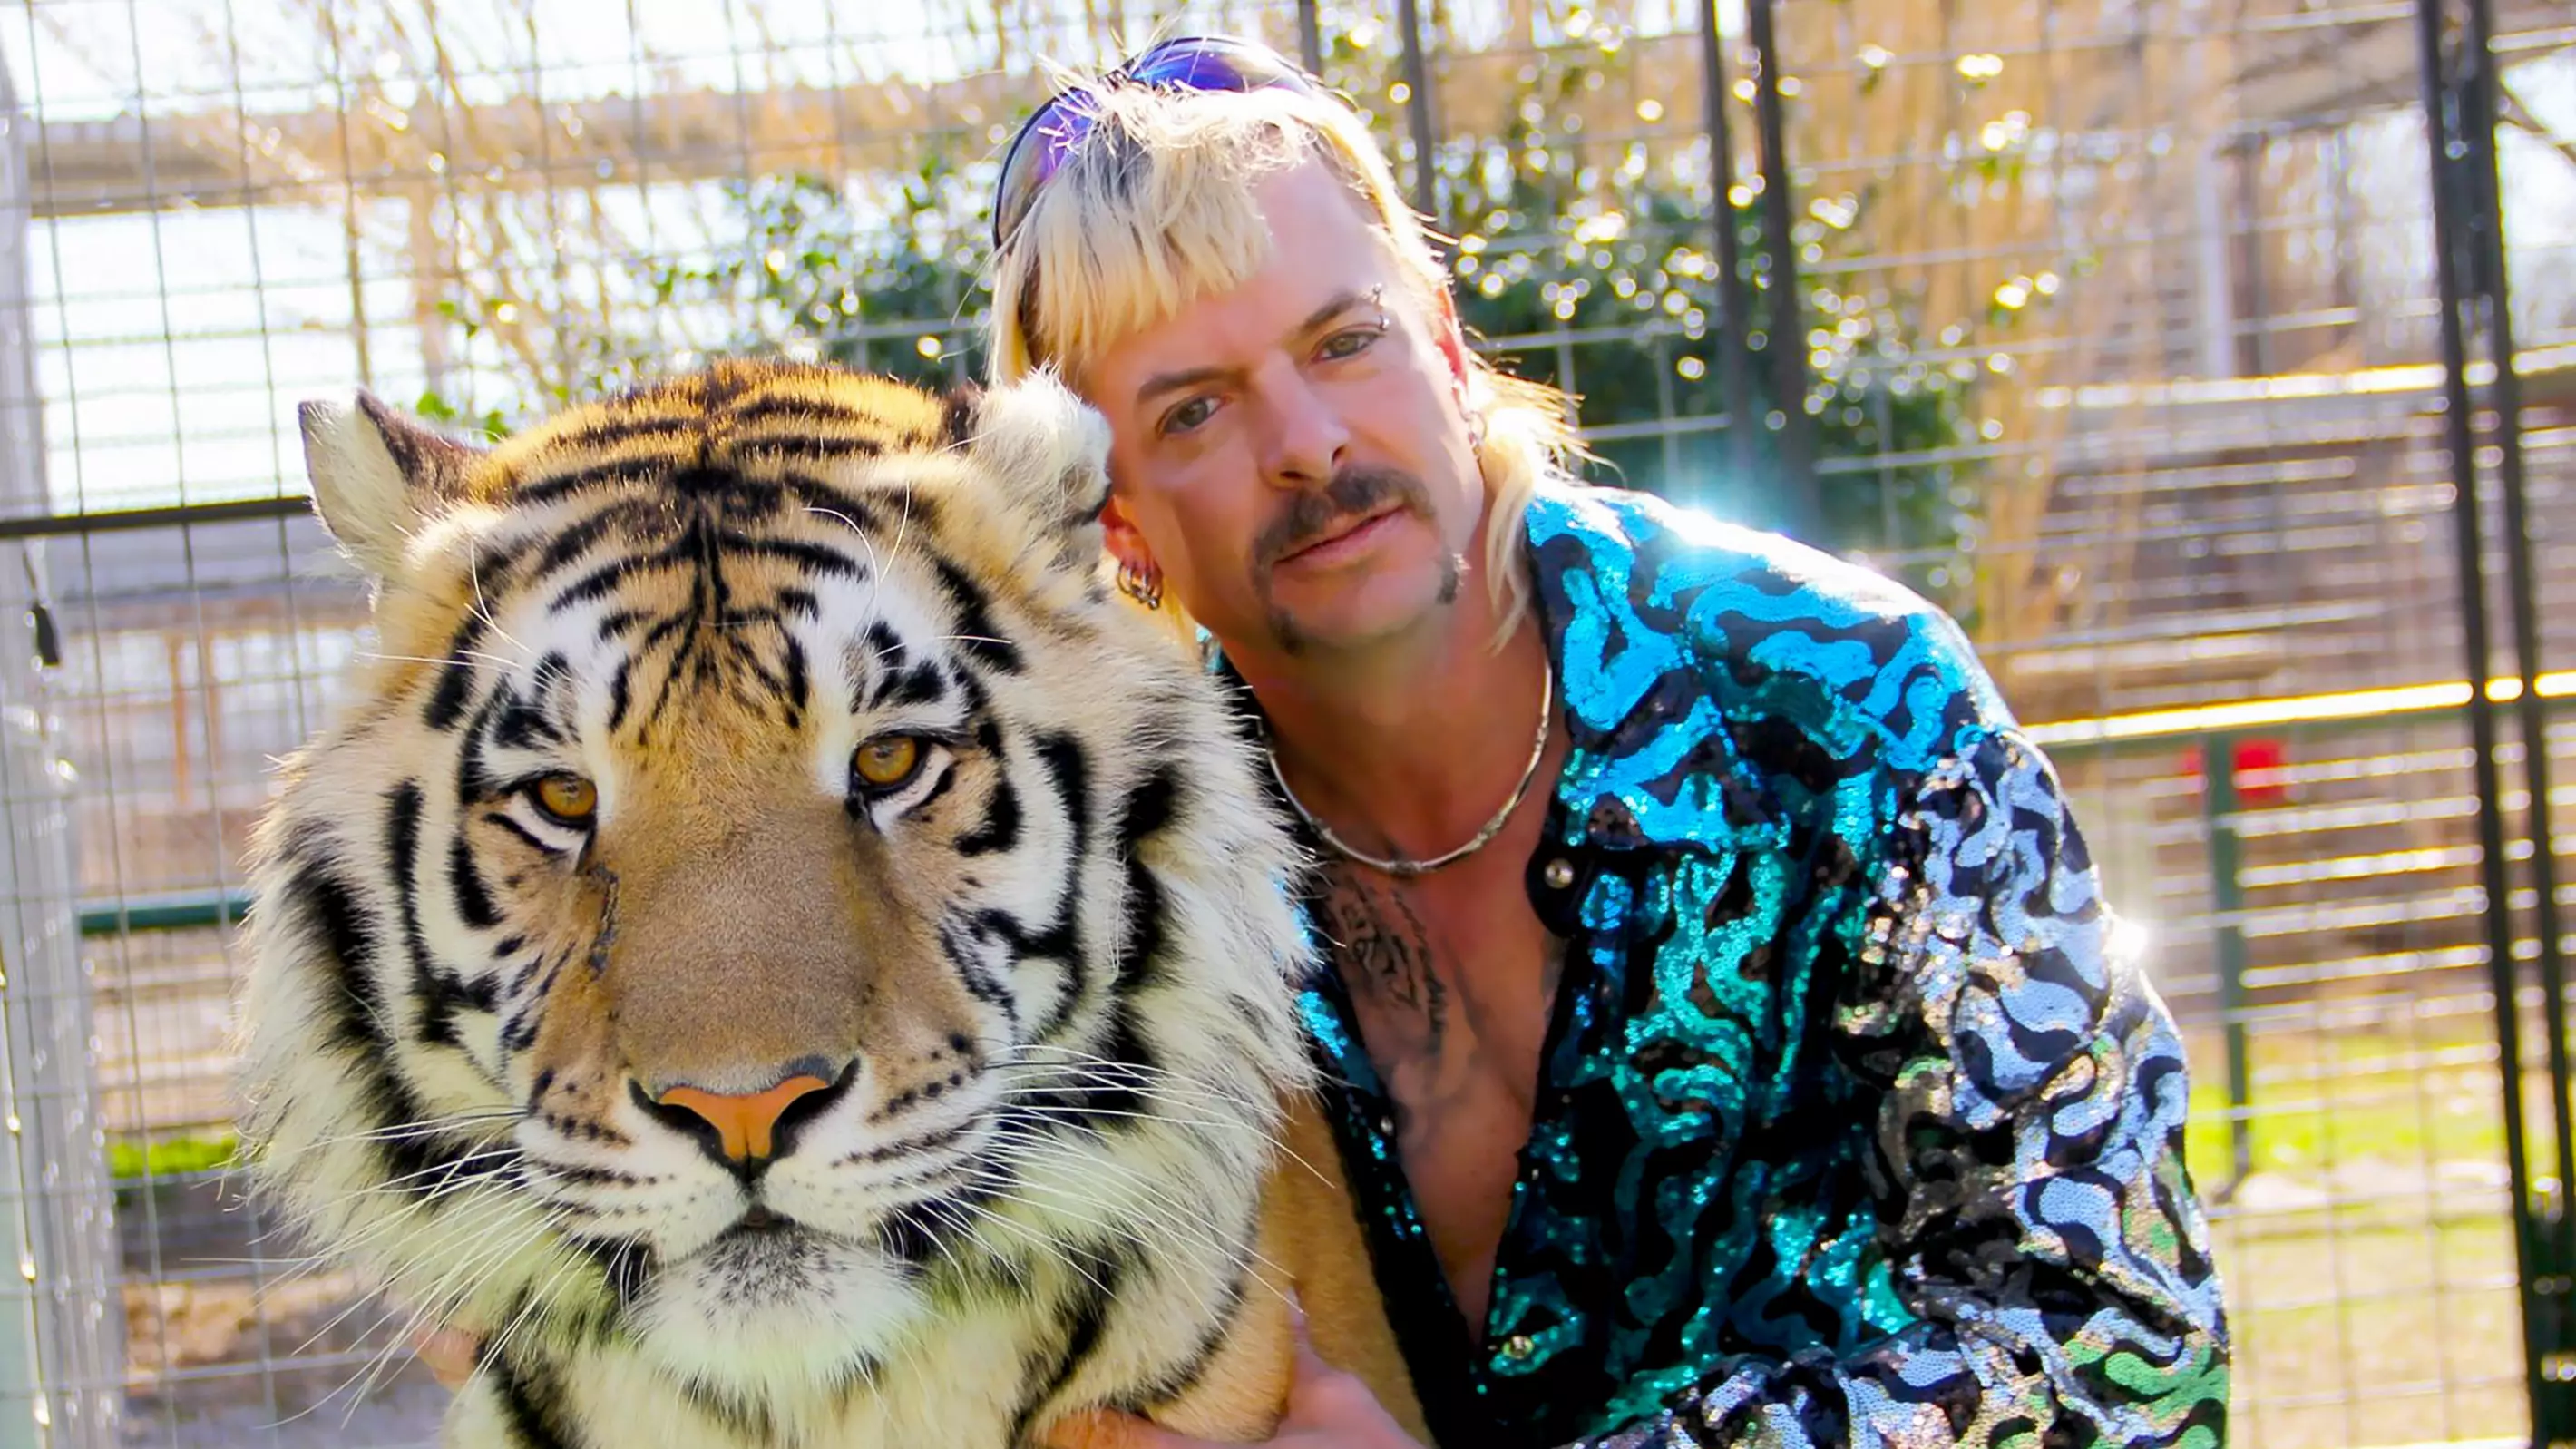 Joe Exotic Will Be In 'Tiger King 2', Claims His Husband Dillon Passage